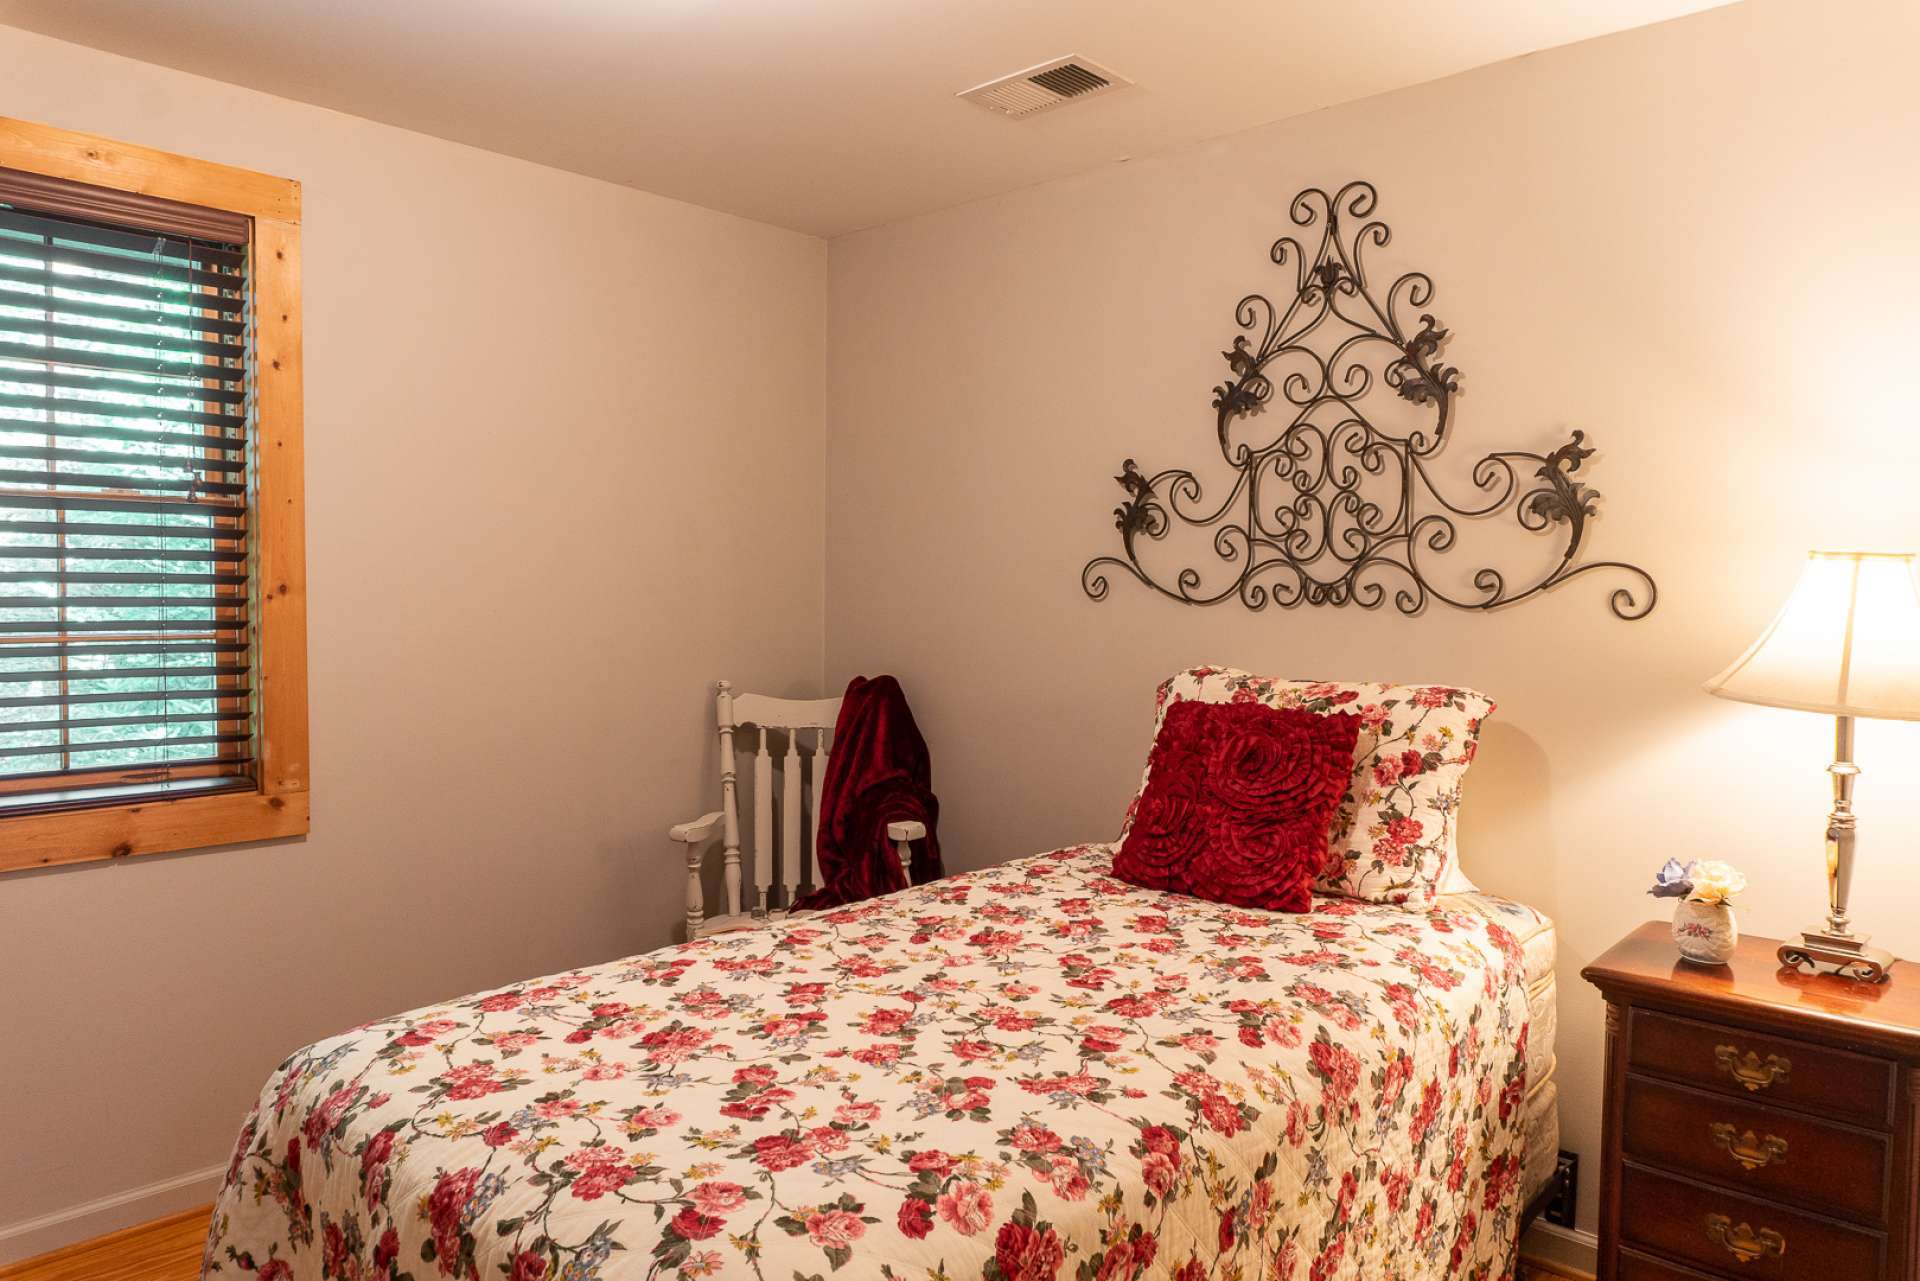 A charming guest bedroom and a full bath complete the main level.